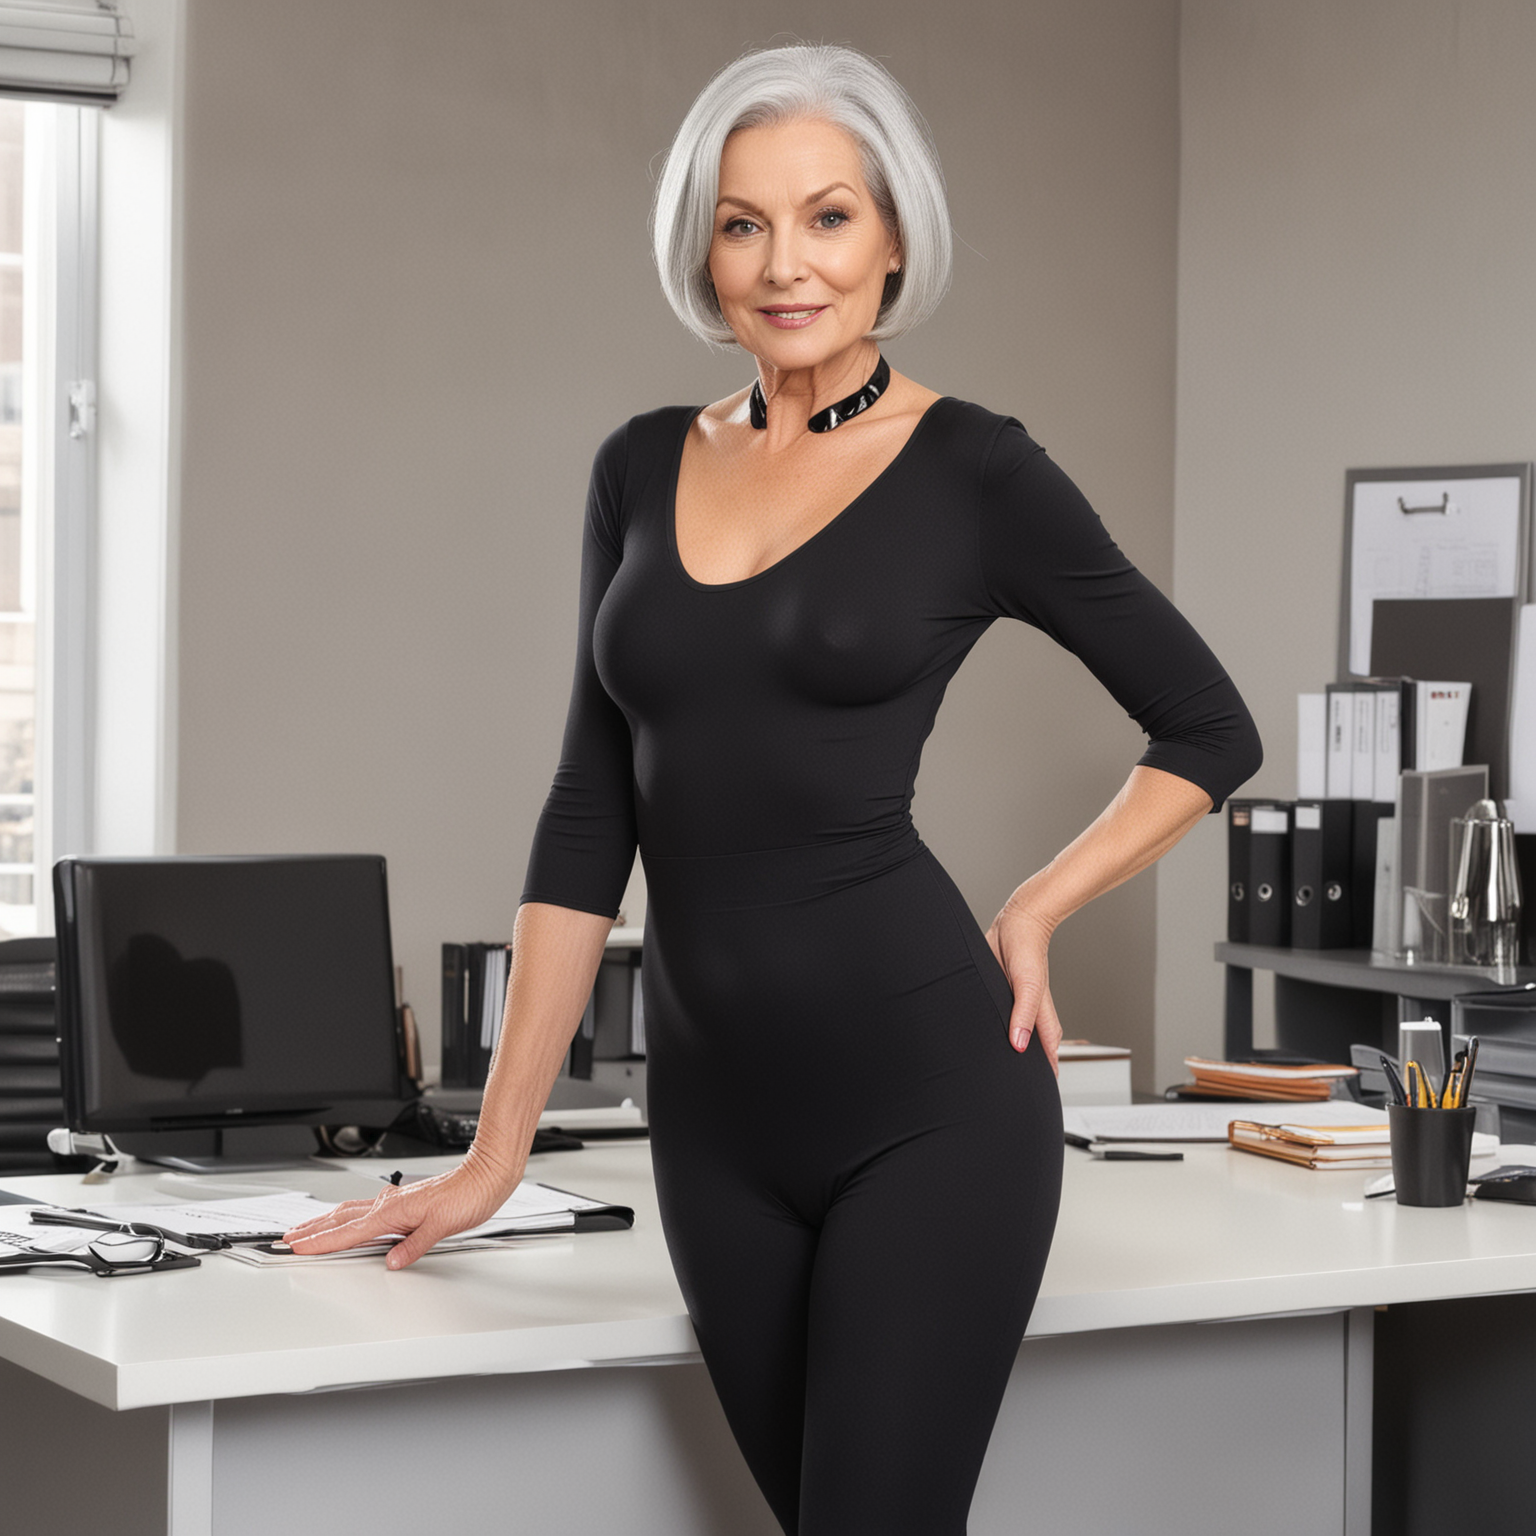 a slim beautiful 70-year-old woman with grey hair in a bob and big breasts wearing a skintight black bodysuit and high heels in an office